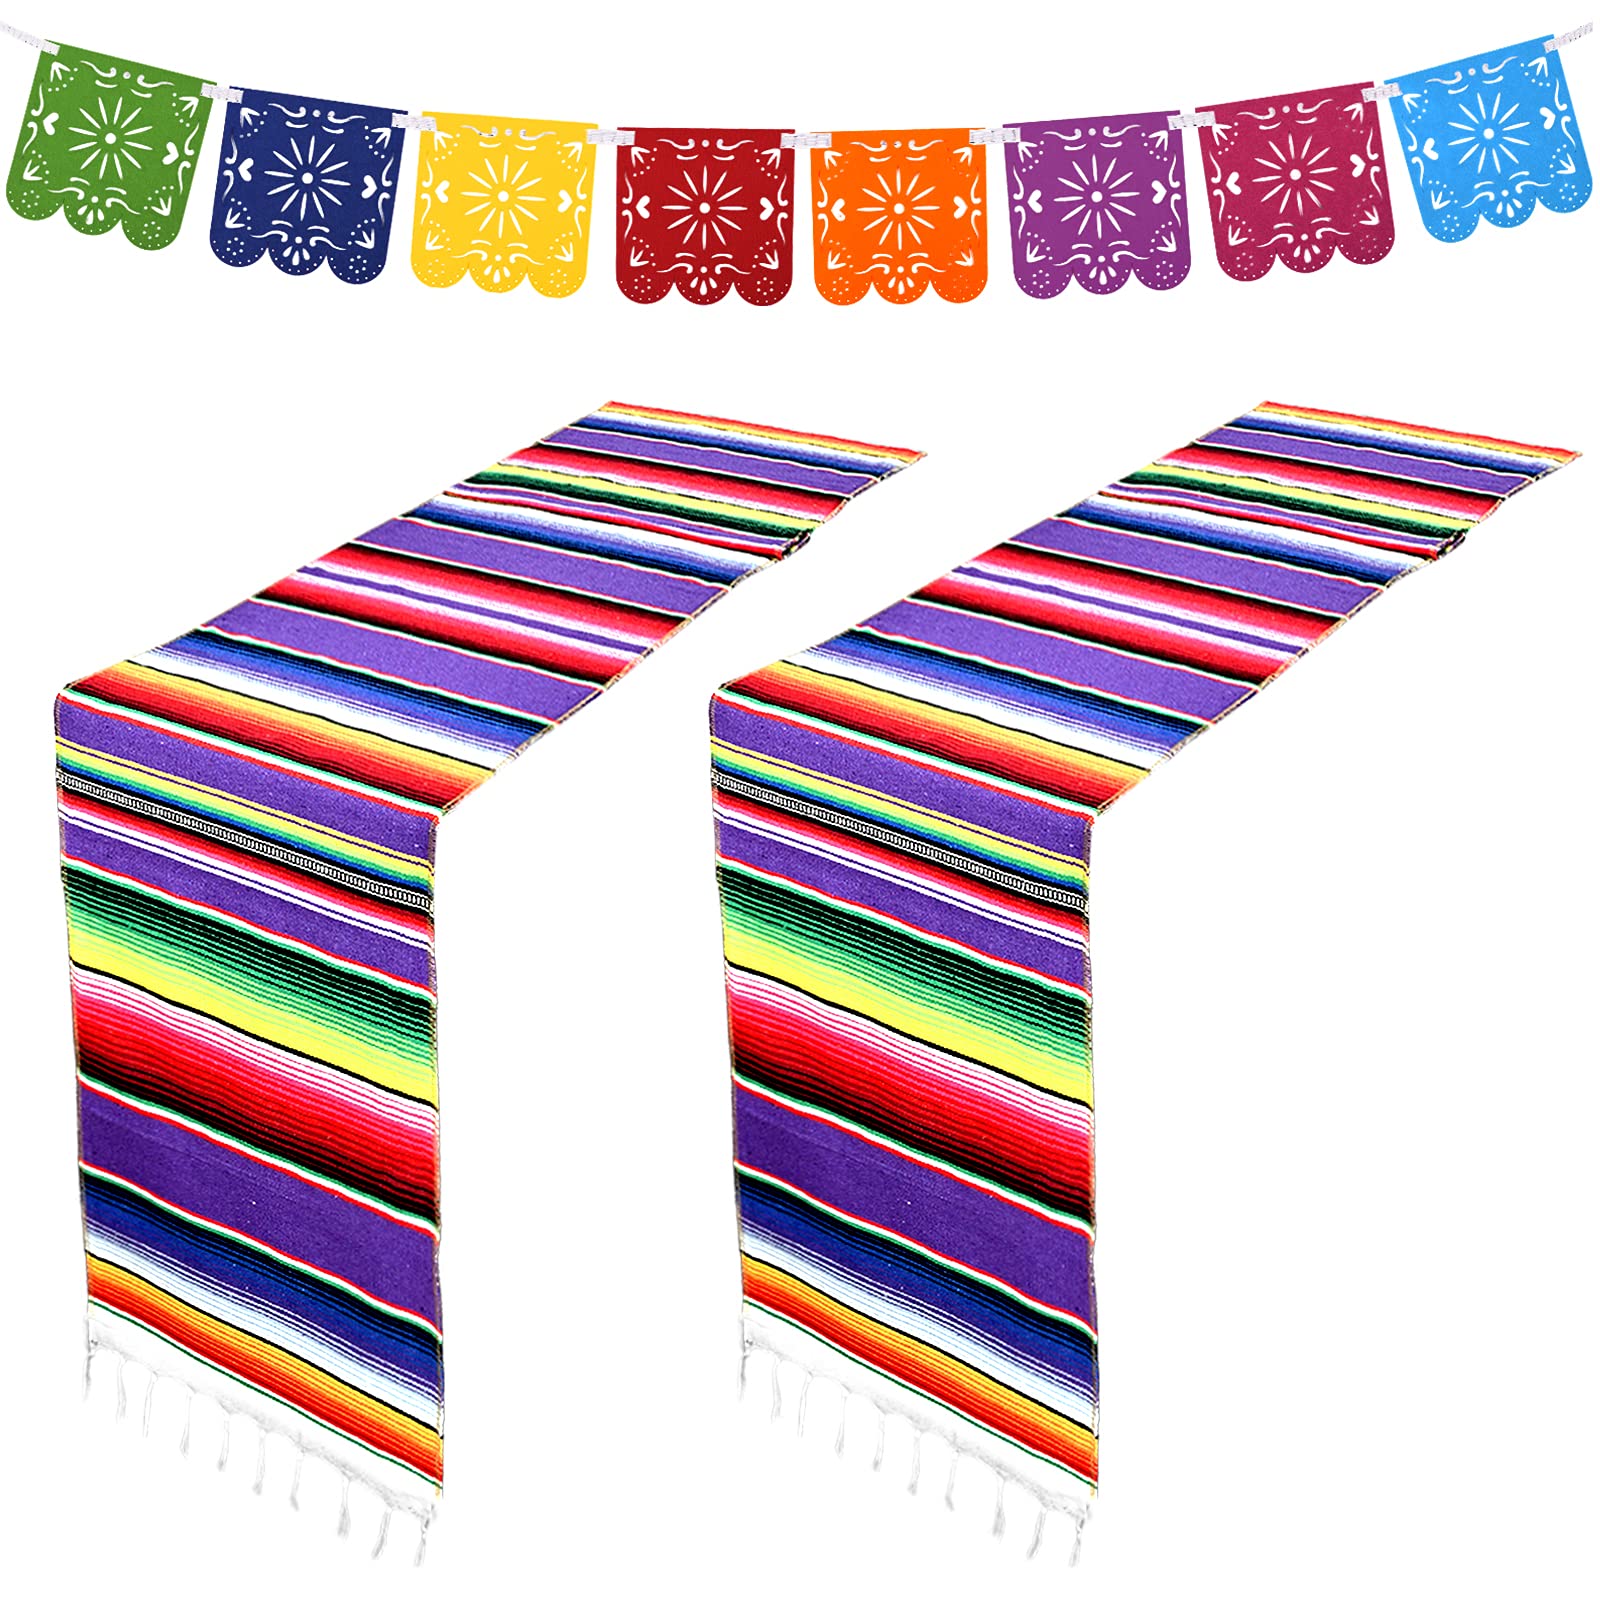 2 Pack Mexican Serape Table Runner 14 x 84 Inch Hand-Woven Mexican Table Runner Colorful Striped Fringe Table Runner 8 Pcs Banners for Mexican Theme Party Wedding Picnics Dining Table Decorations